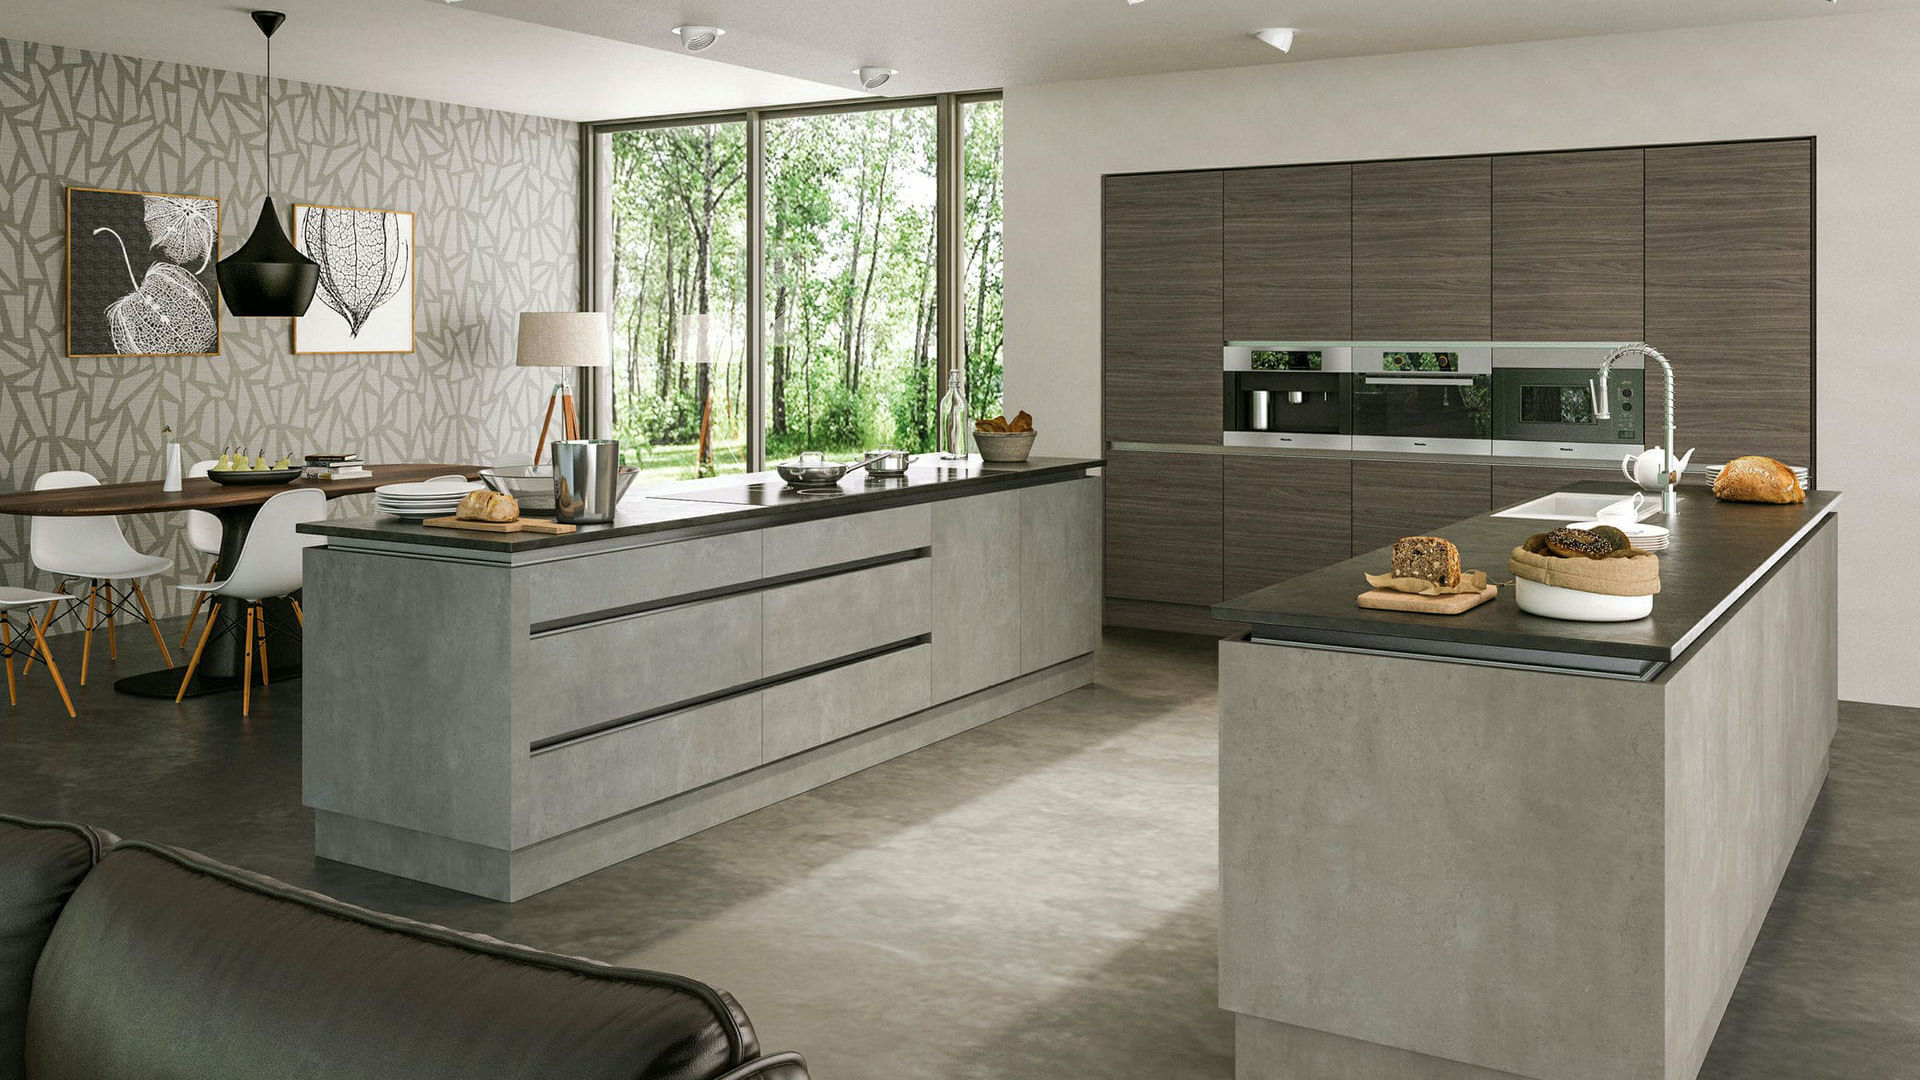 Matt textured light concrete kitchens embracing an industrial aesthetic with a smooth finish